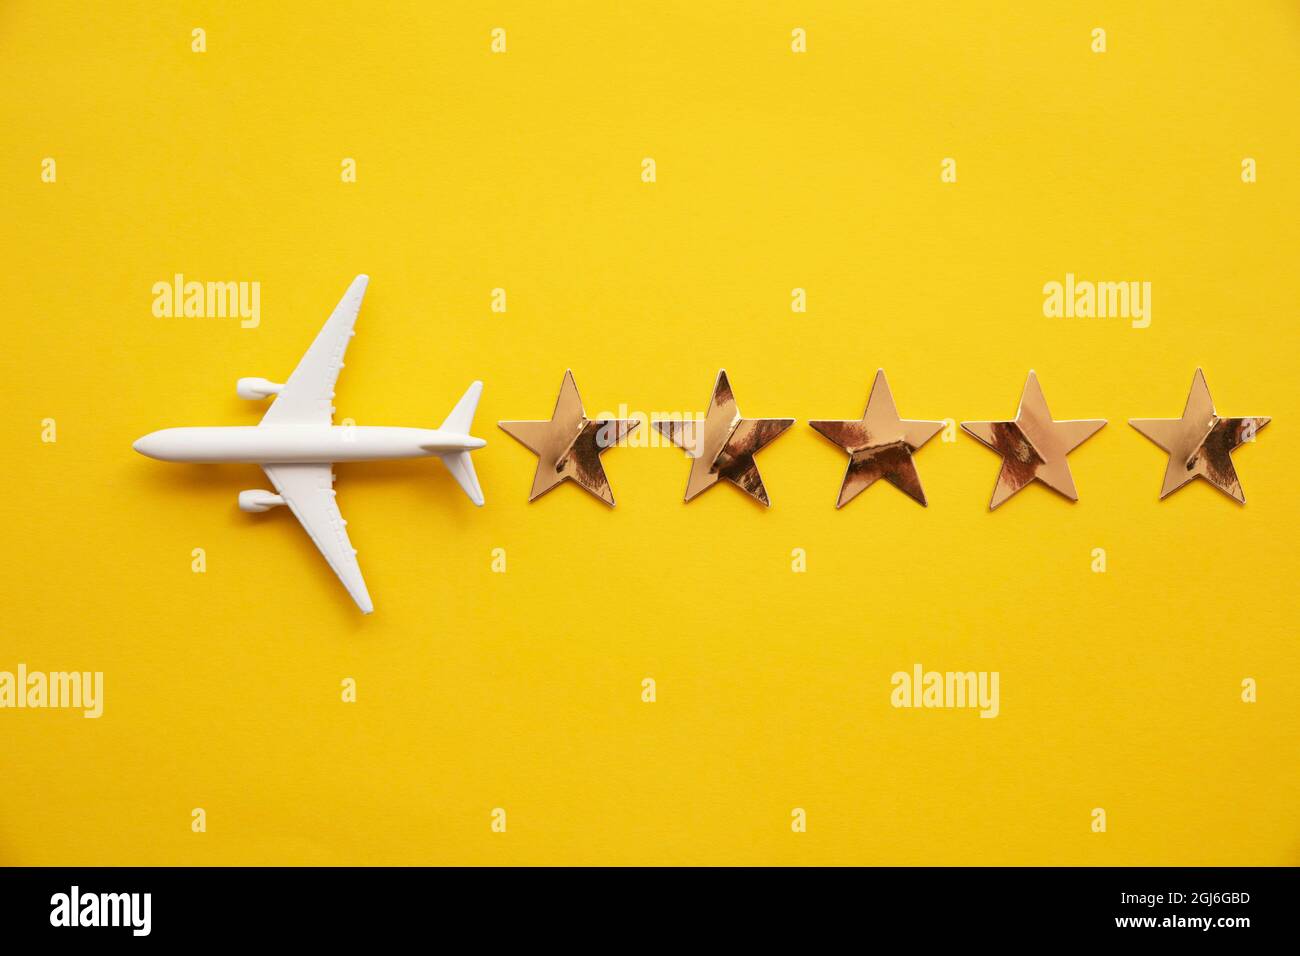 Airplane vacation travel 5 star rating passenger experience background Stock Photo